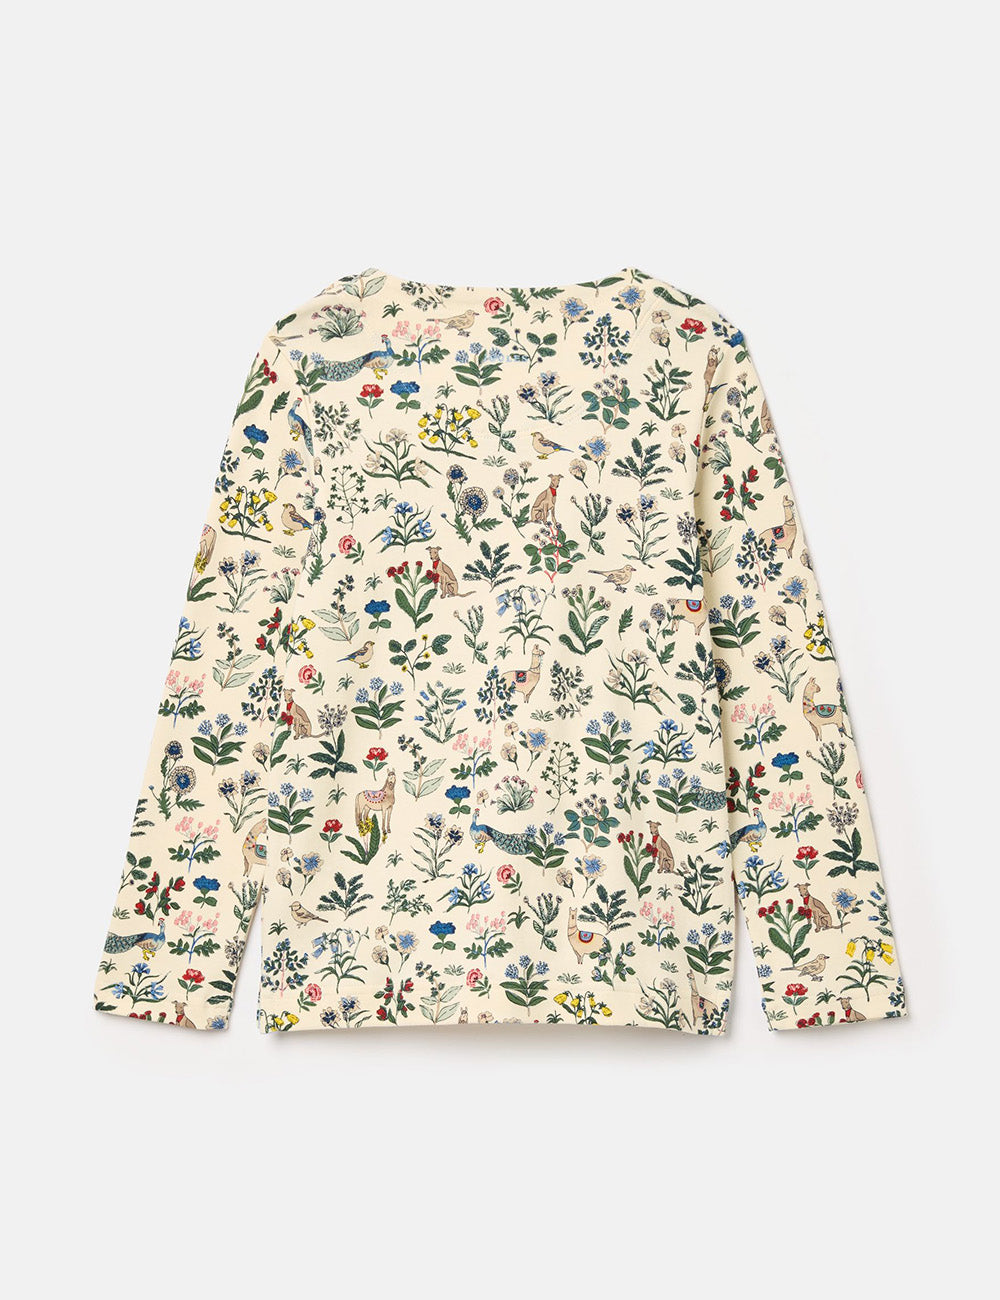 Joules Harbour Long Sleeve T-Shirt - Cream Animal Floral